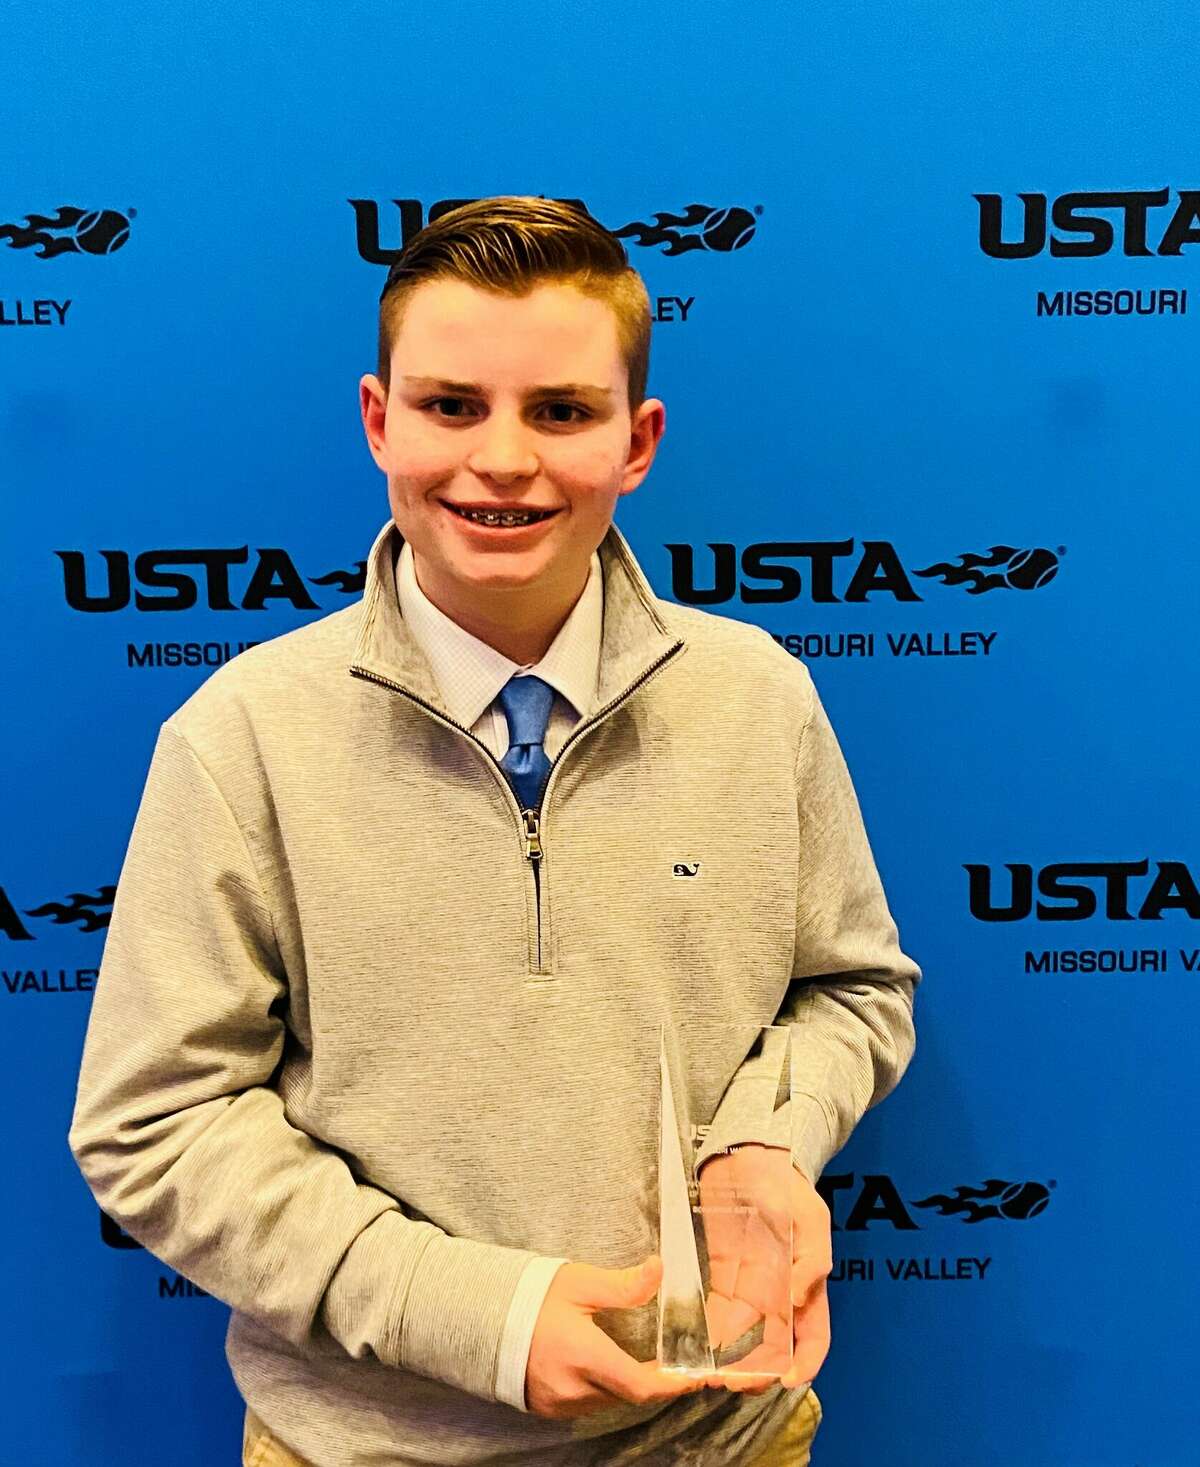 Schaefer Bates at the USTA award ceremony, where he was awarded the Missouri Valley Emerging Player of the Year.